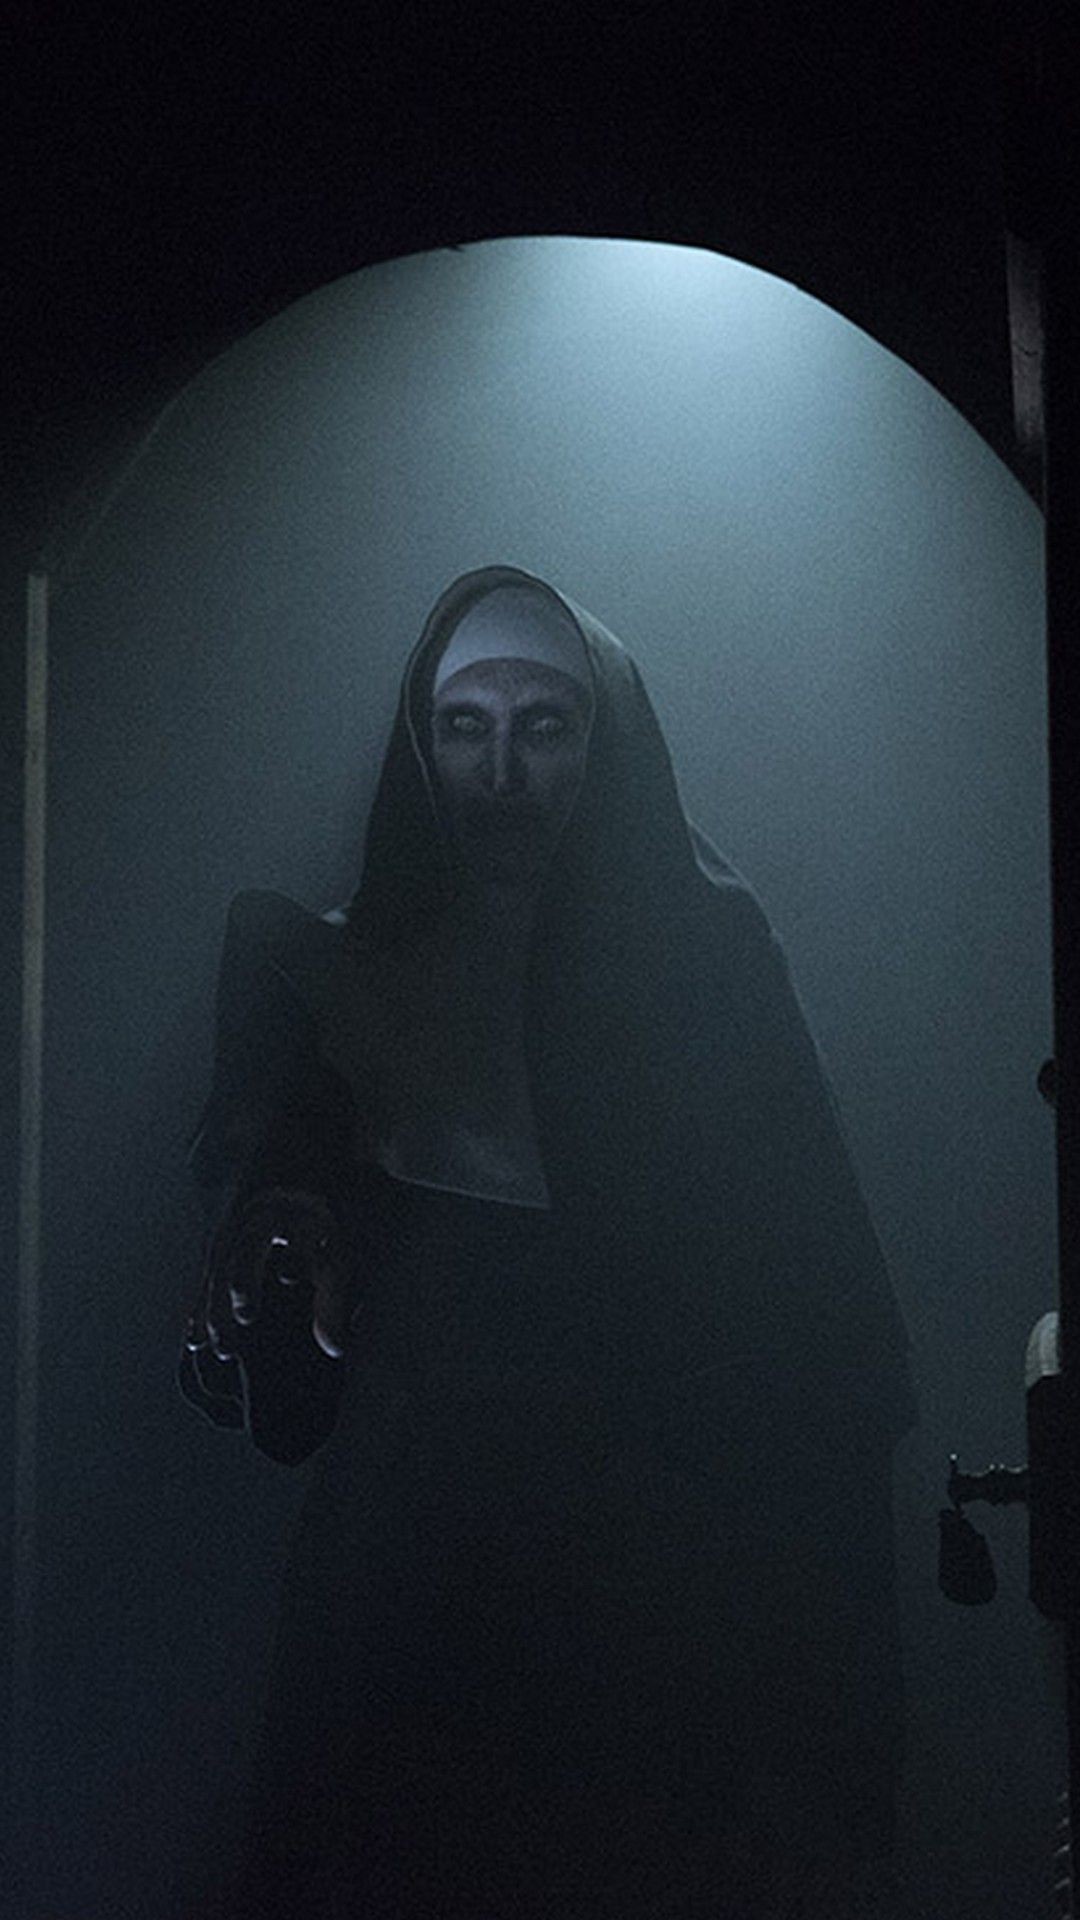 1080x1920 Android Wallpaper The Nun Valak - Best Android Wallpapers